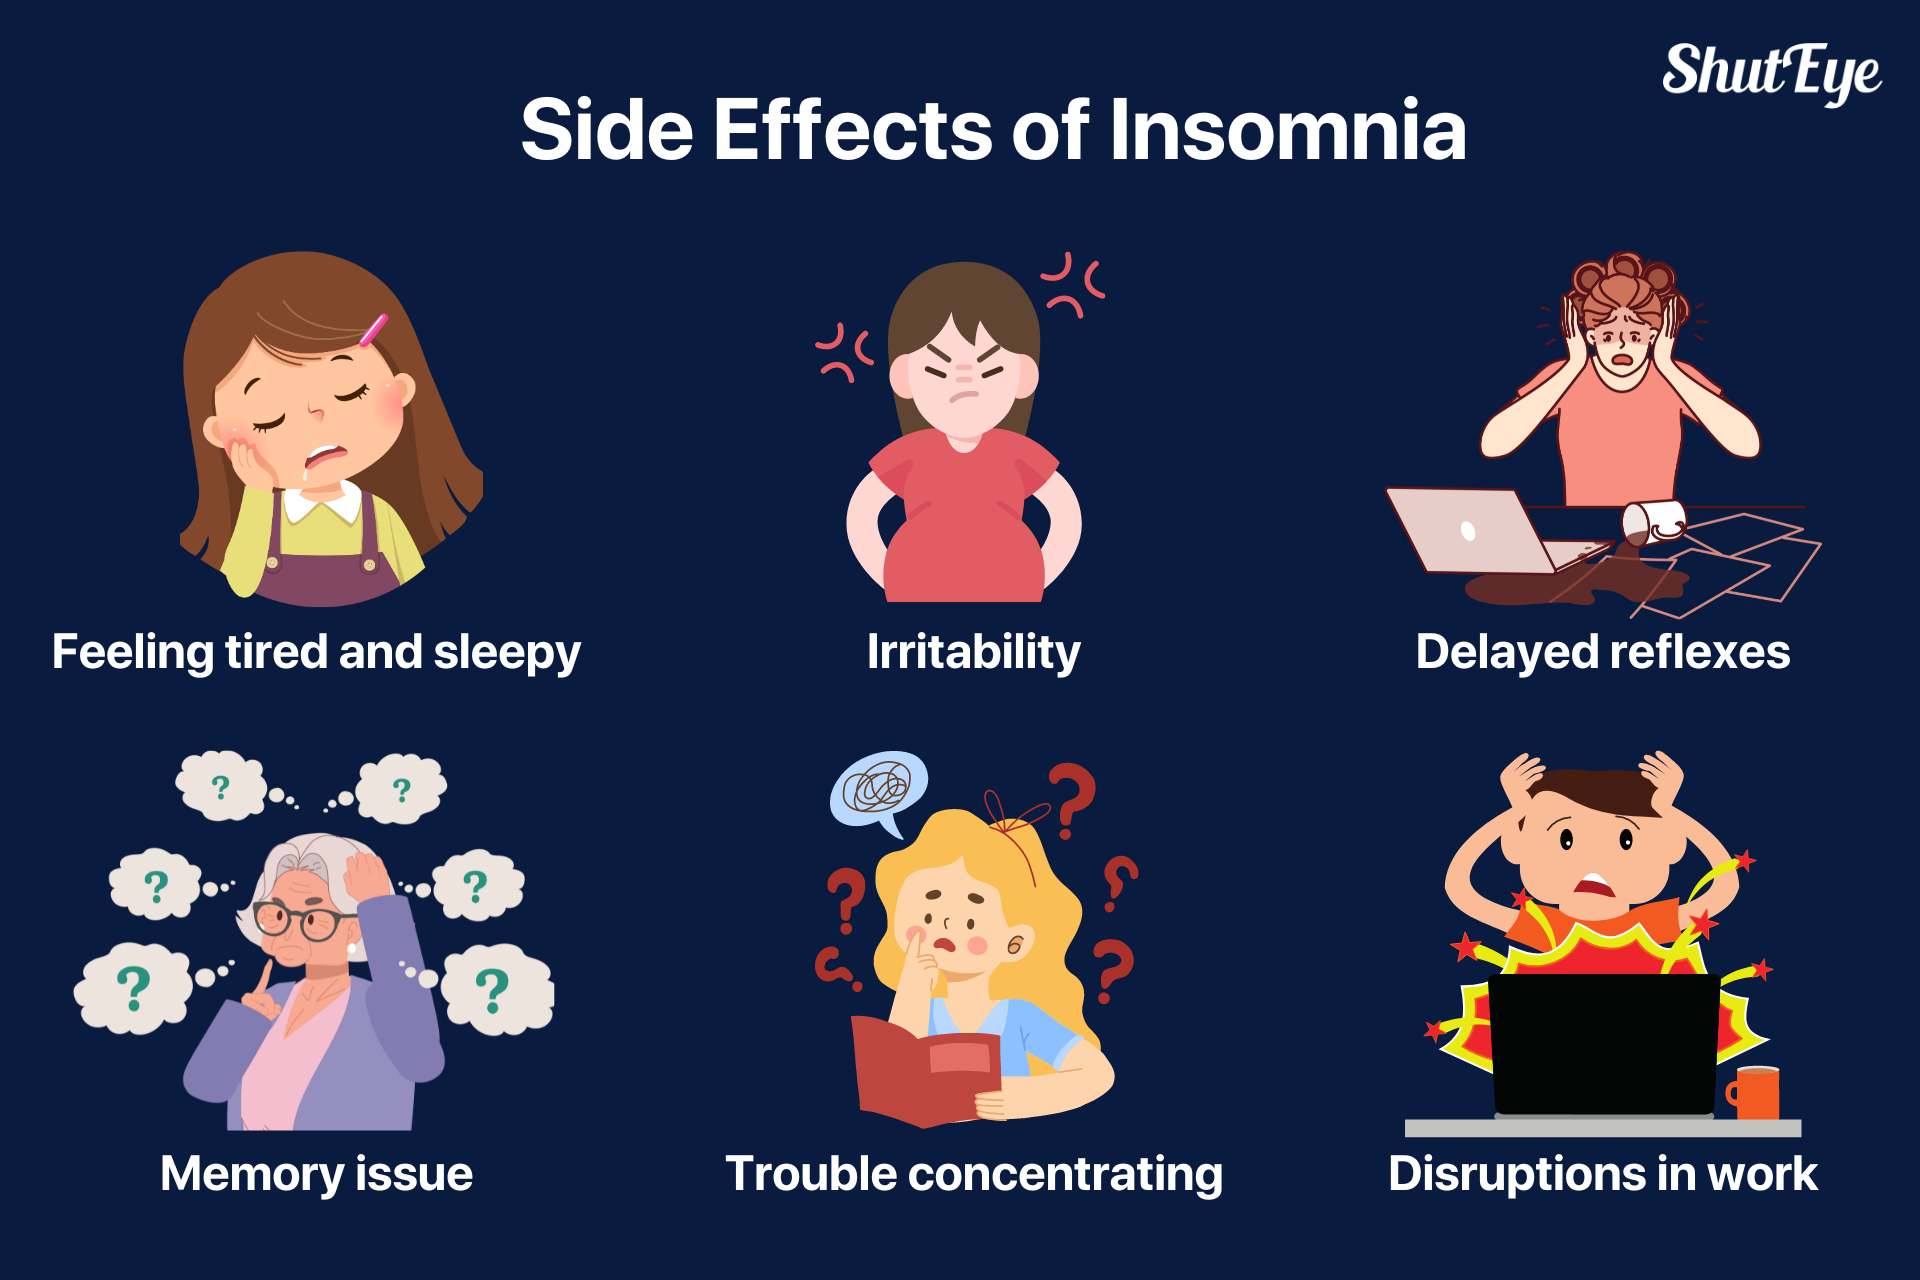 side effects of insomnia are sleepiness, irritability, delayed reflexes, memory issue, trouble concentrating and disruptions in work and social life